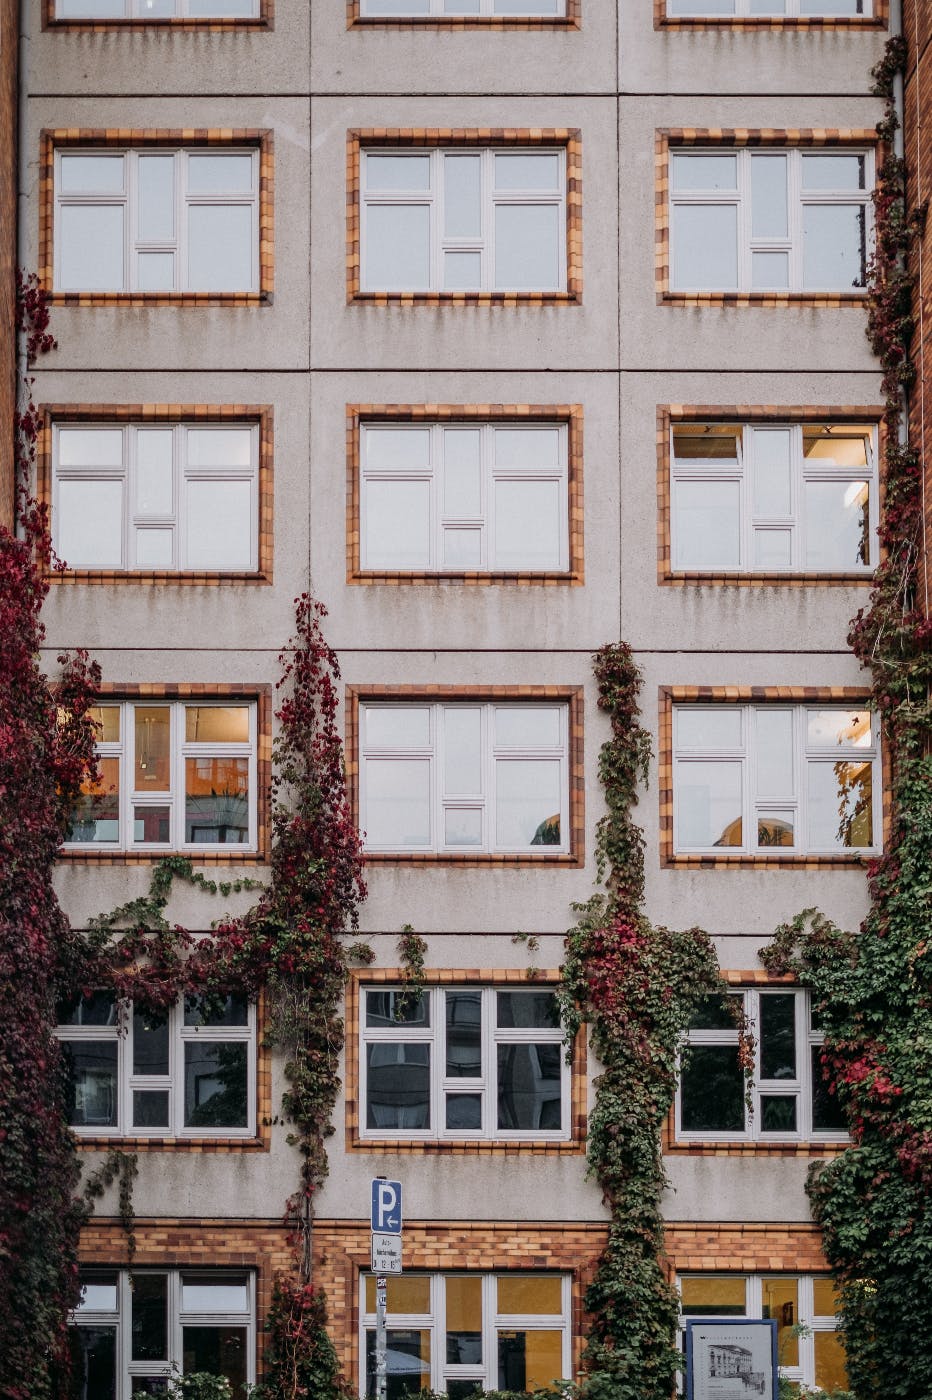 Rows of identical windows on an apartment building